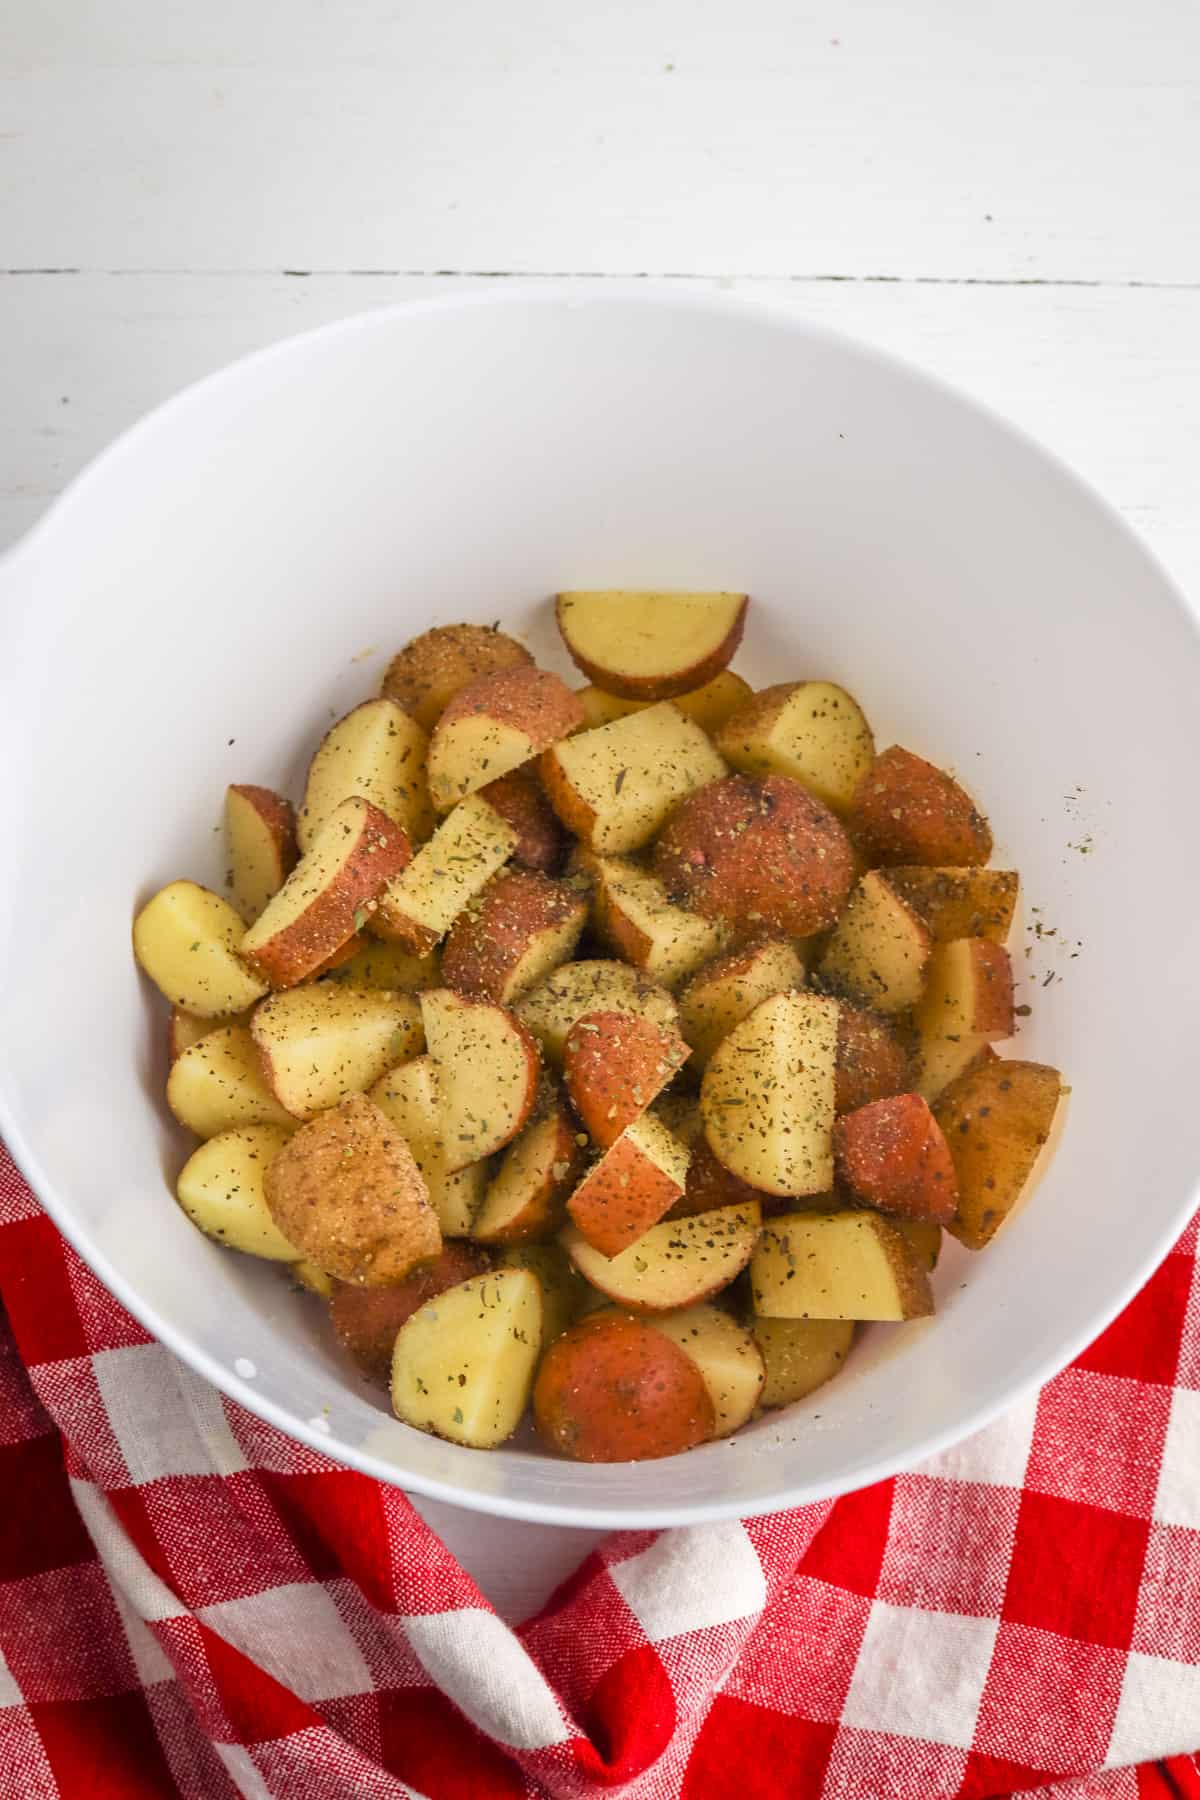 Chopped potatoes coated with oil and seasoning in a white mixing bowl.